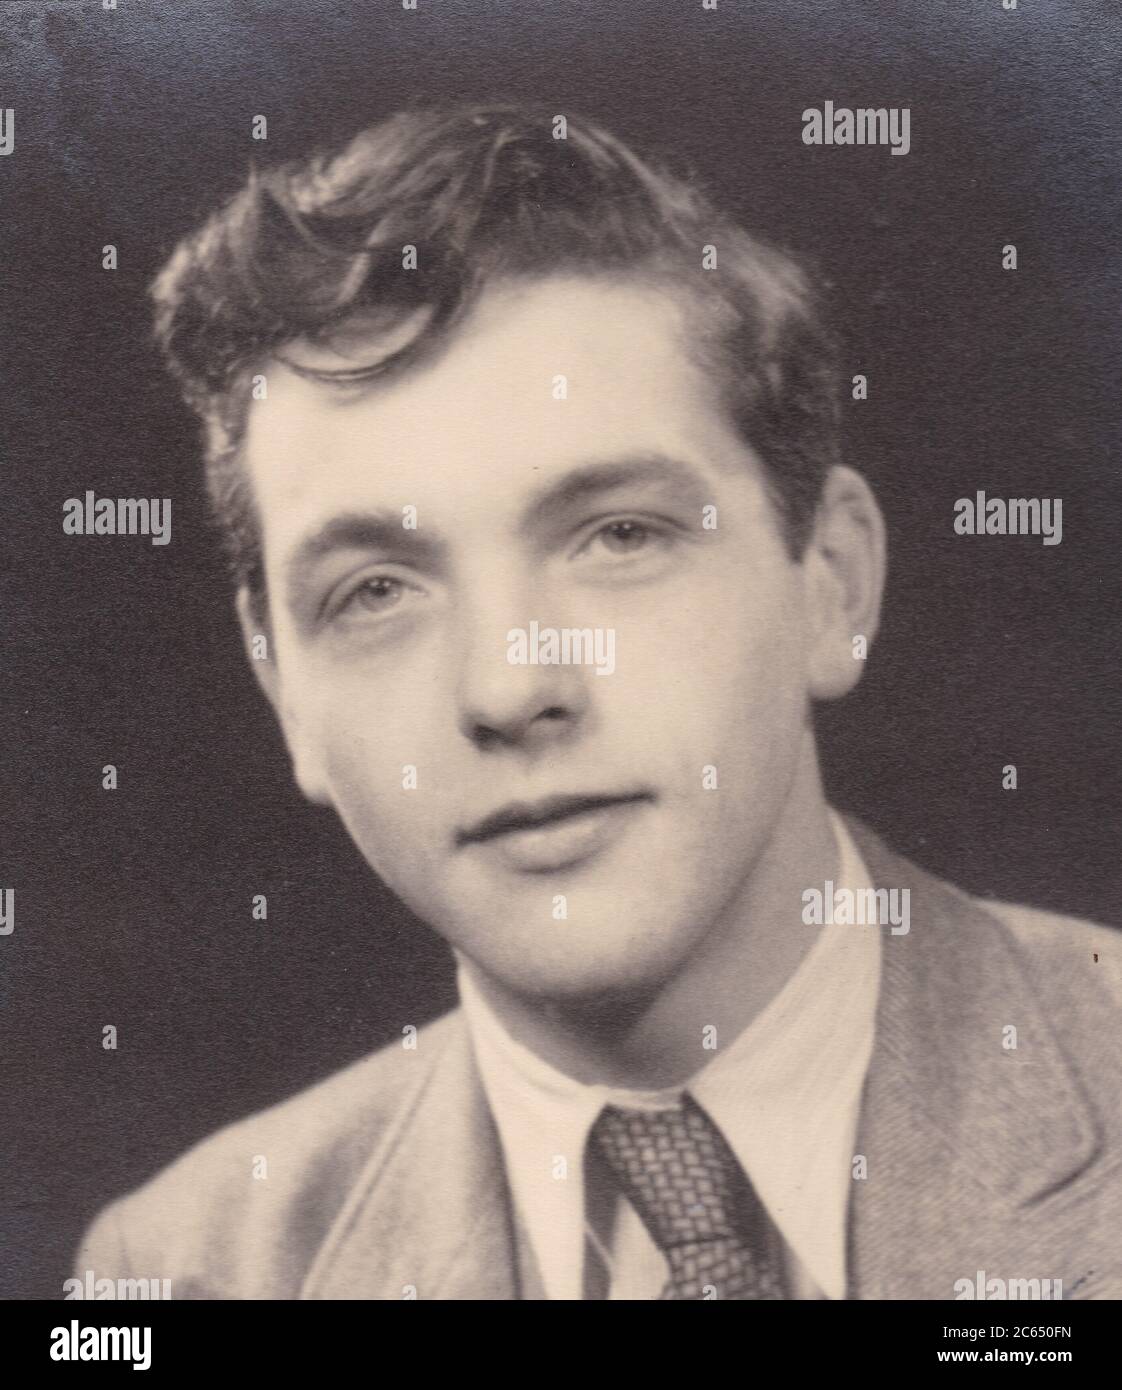 Vintage black and white portrait photo of a handsome young man 1940s. Stock Photo